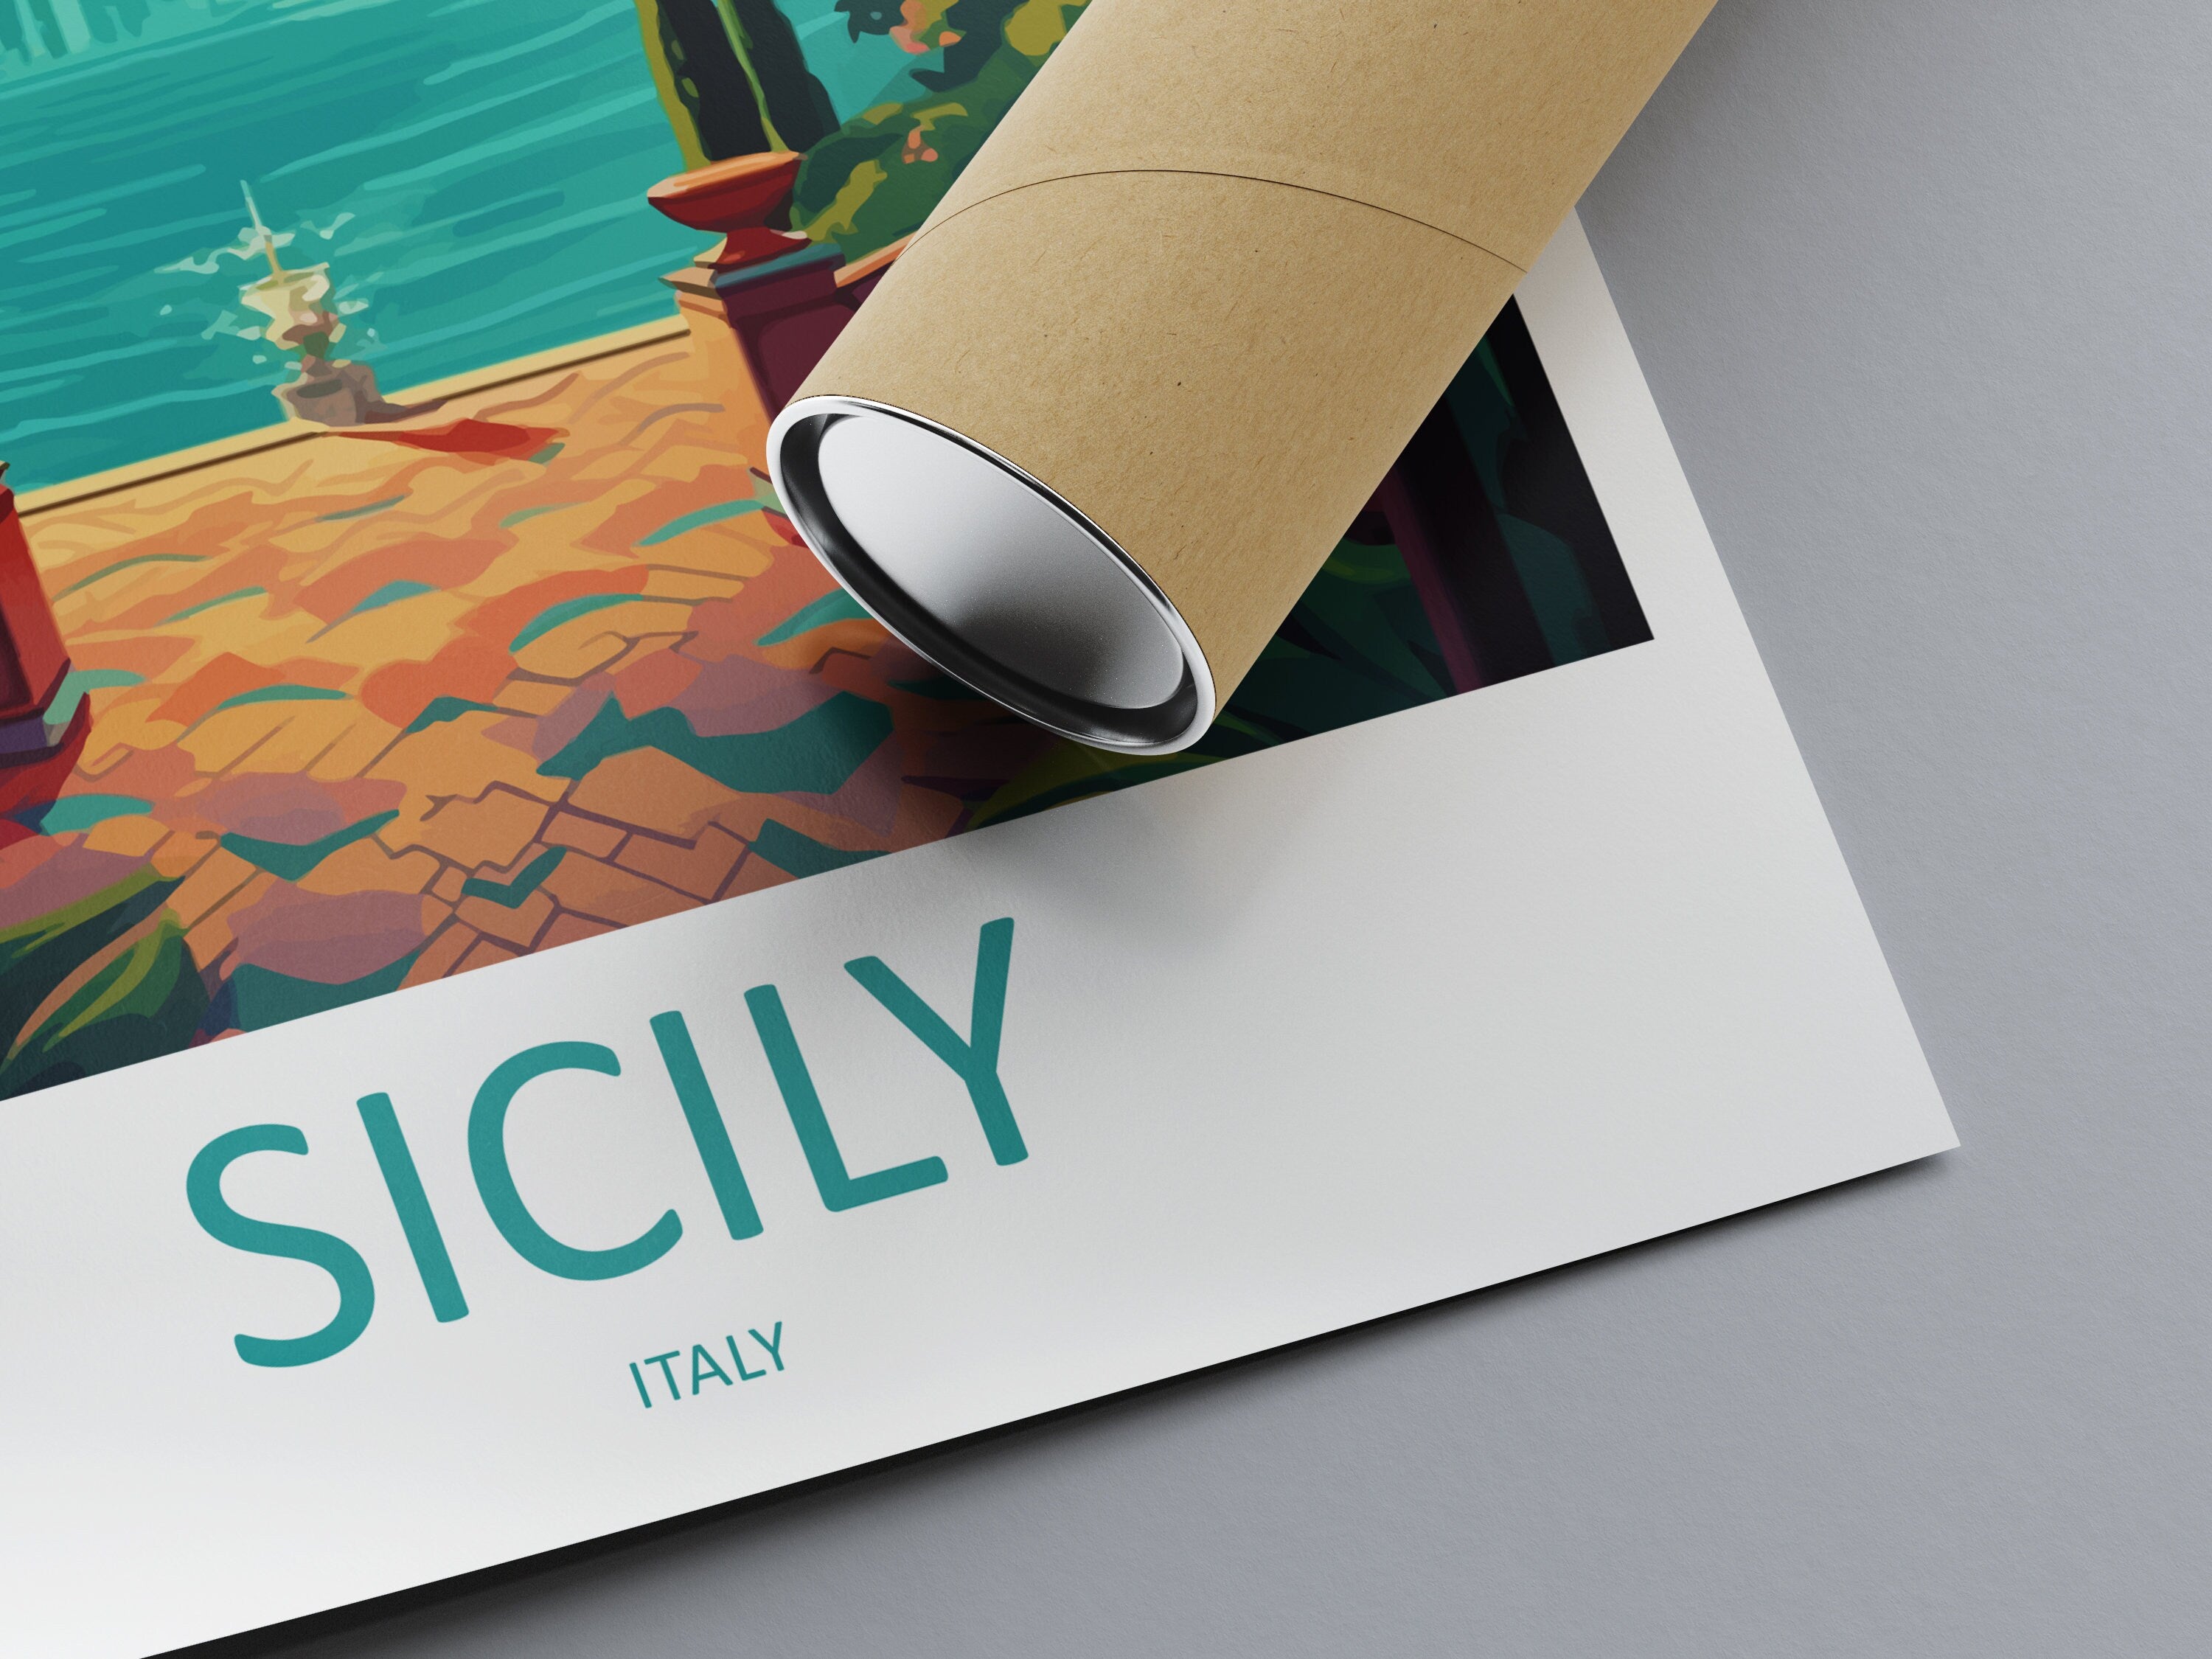 Sicily Travel Print Wall Art Sicily Italy Wall Hanging Home Decoration Sicily Gift Art Lovers Wall Art Print Sicily Italy Art Sicily Poster